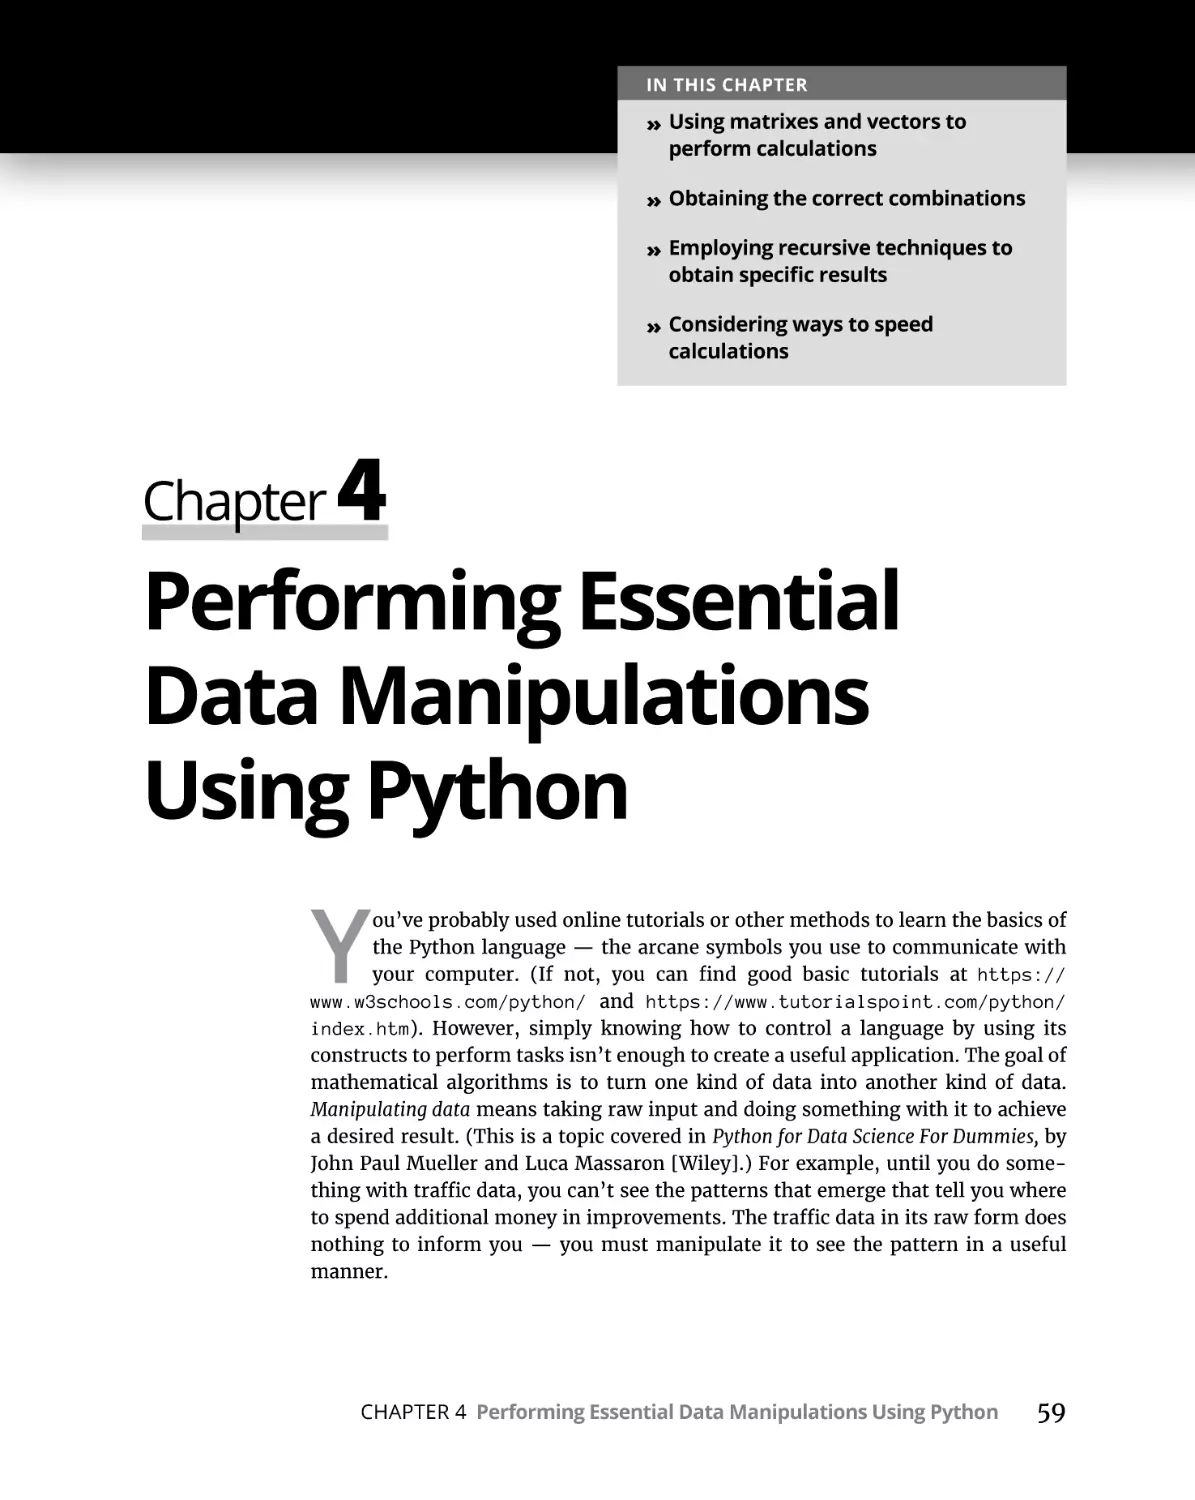 Chapter 4 Performing Essential Data Manipulations Using Python